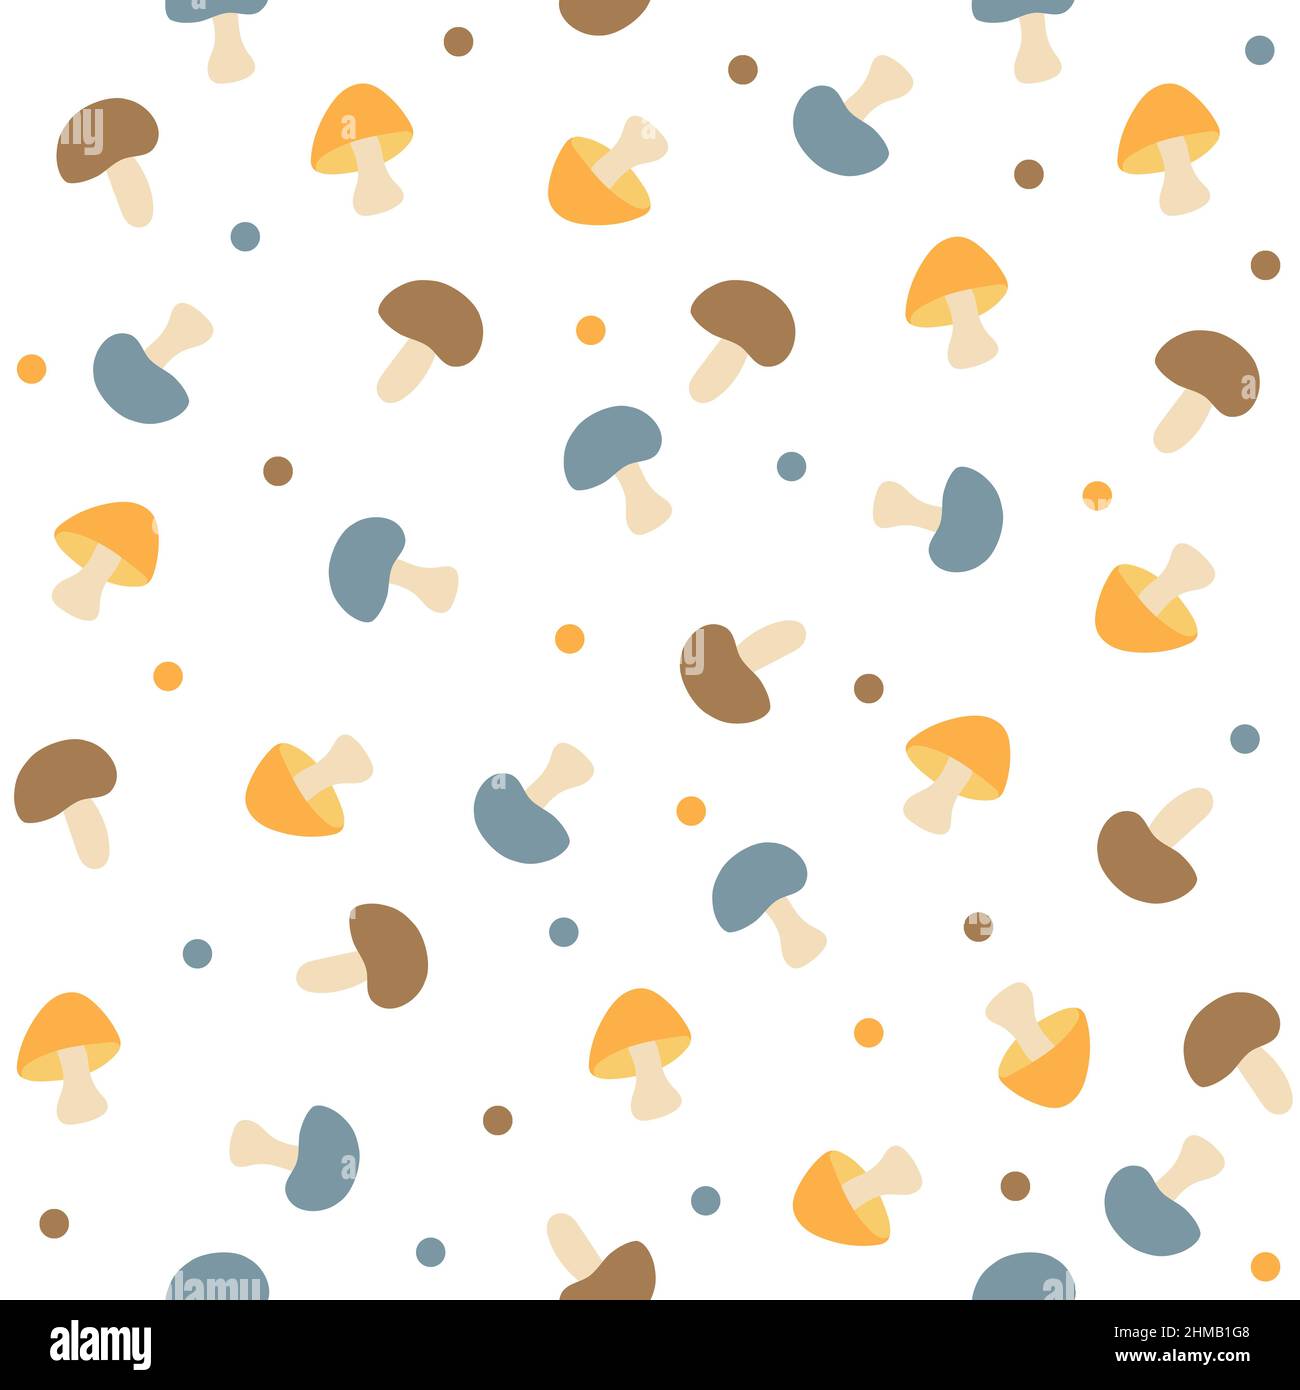 Seamless vector pattern of various mushrooms on white background. Simple hand drawn style Stock Vector